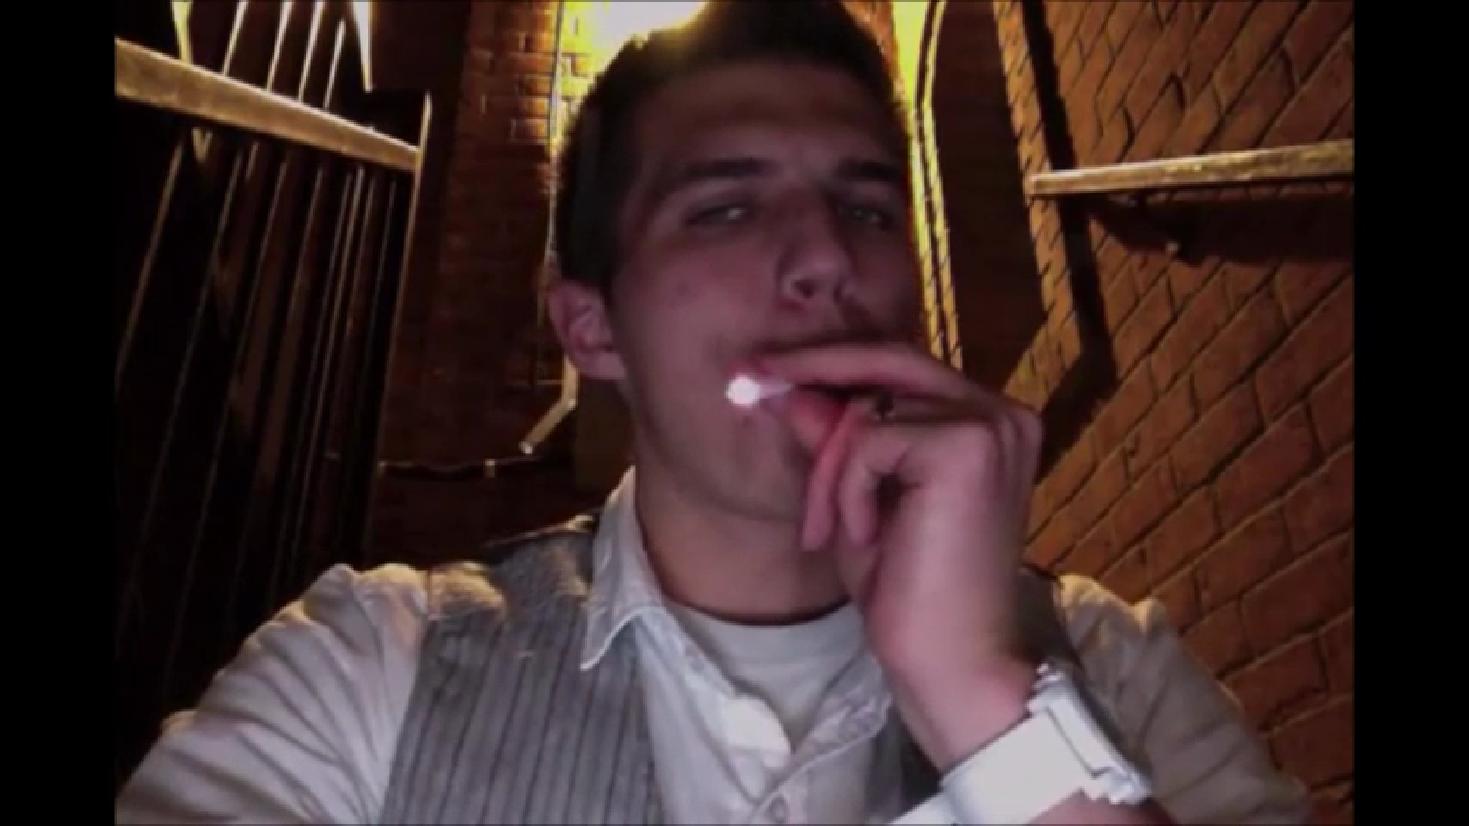 "that-felt-good"-video guy does weird burp and cig draw